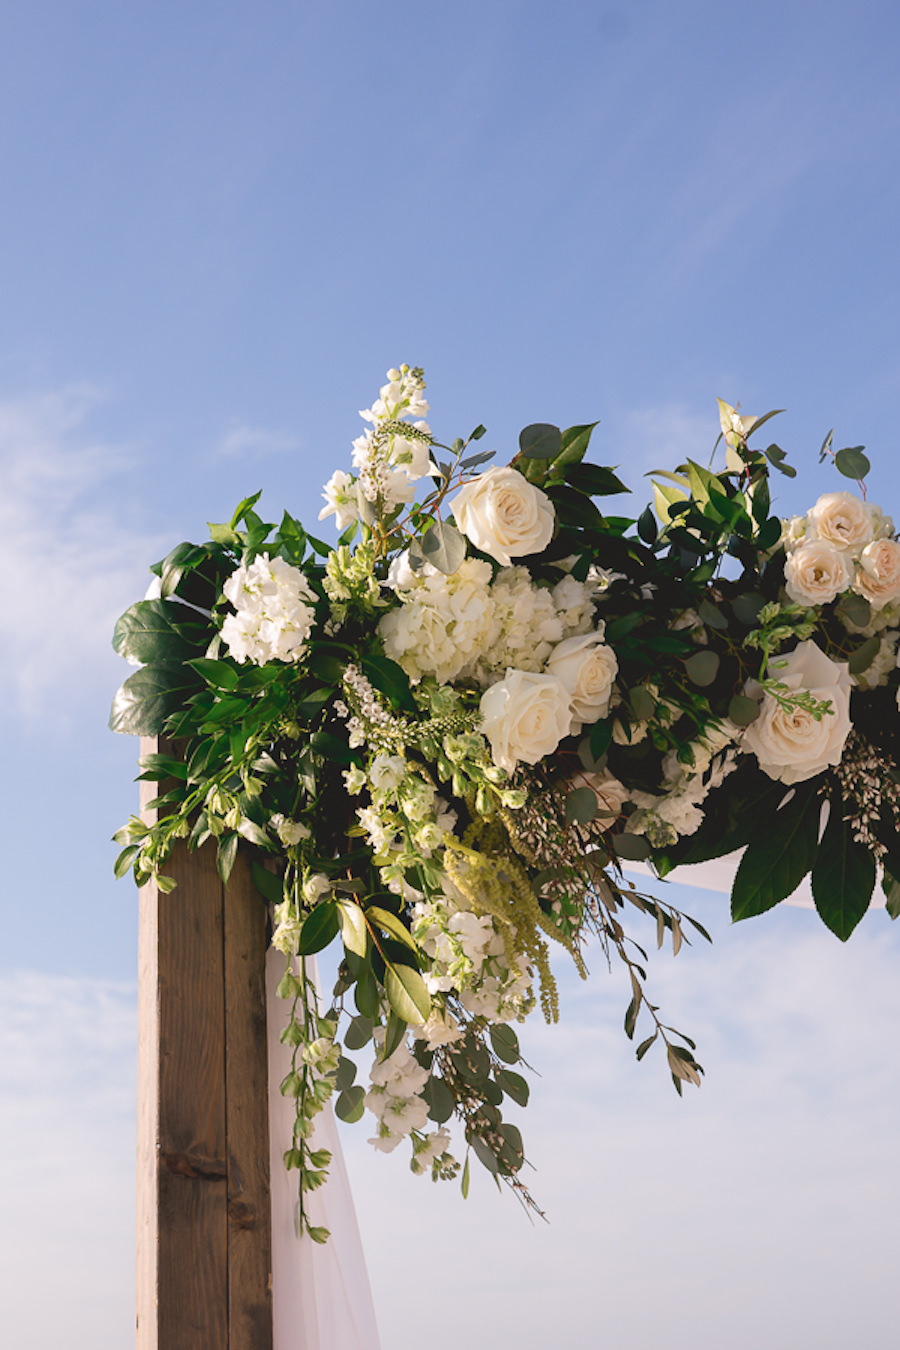 Outdoor Florida Wedding Ceremony Arch Floral Decor with Ivory Roses, Hydrangeas and Greenery